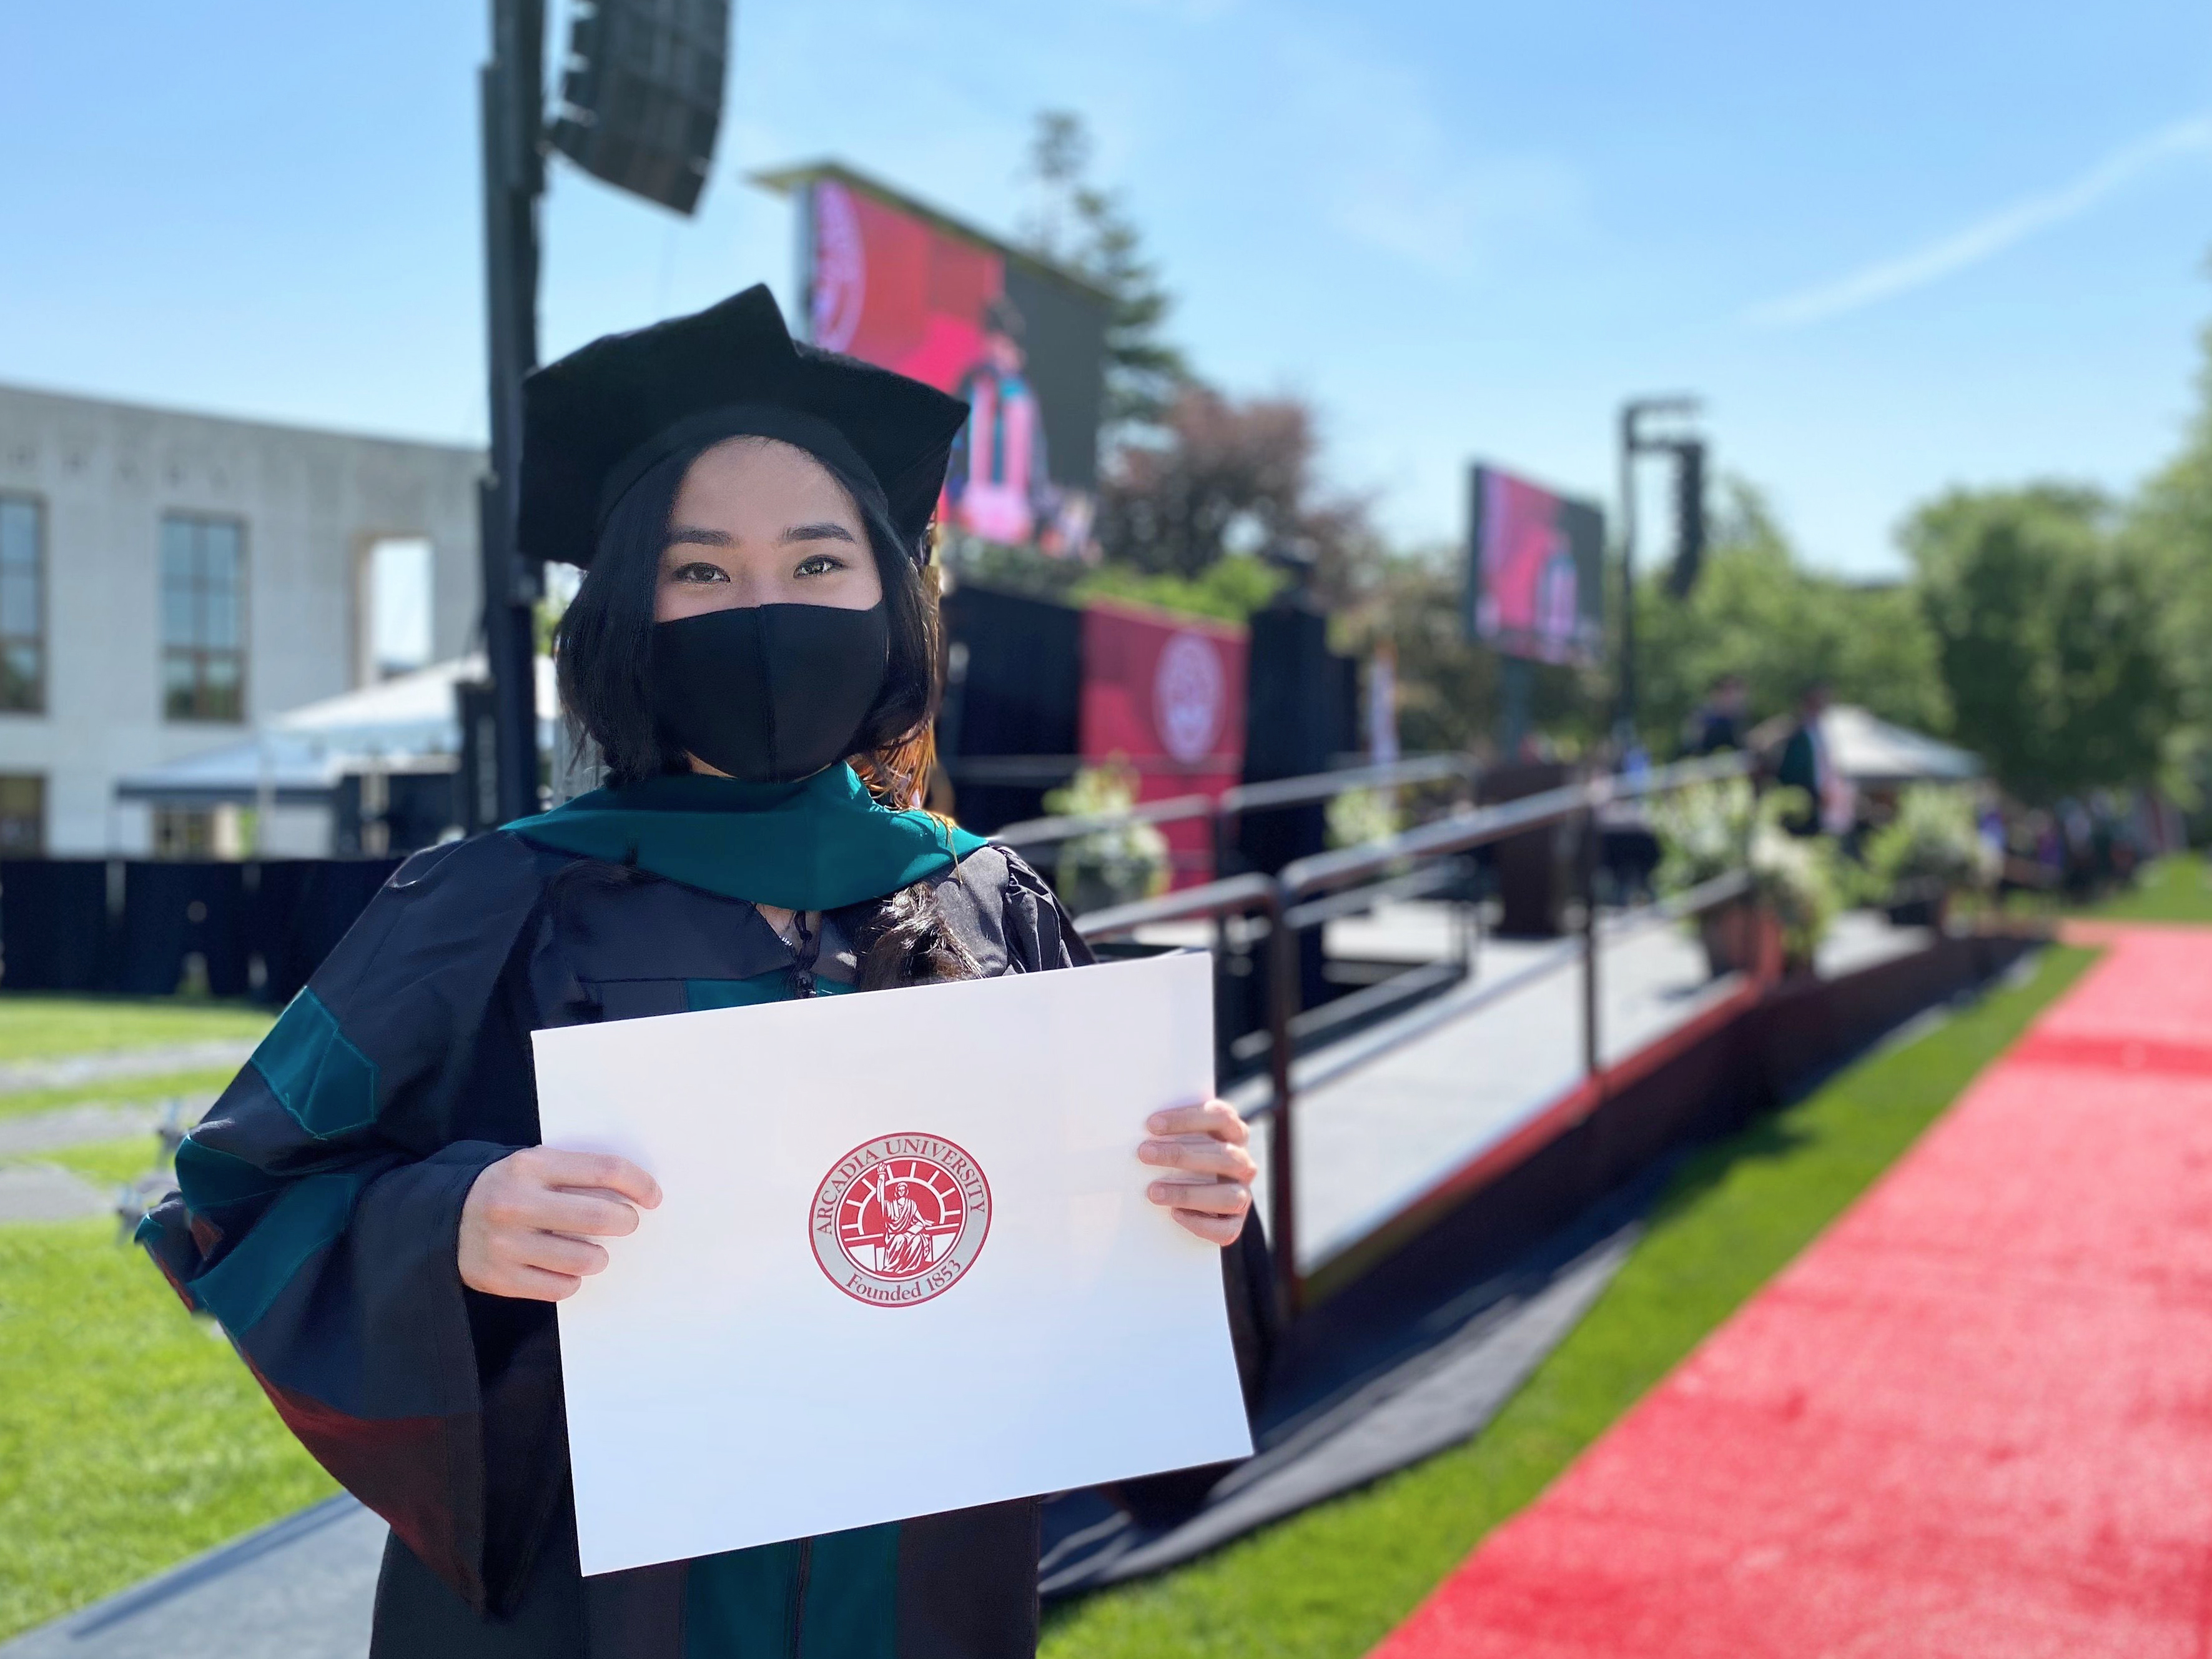 A graduating Doctorate student holding her diploma envelope in her hands.